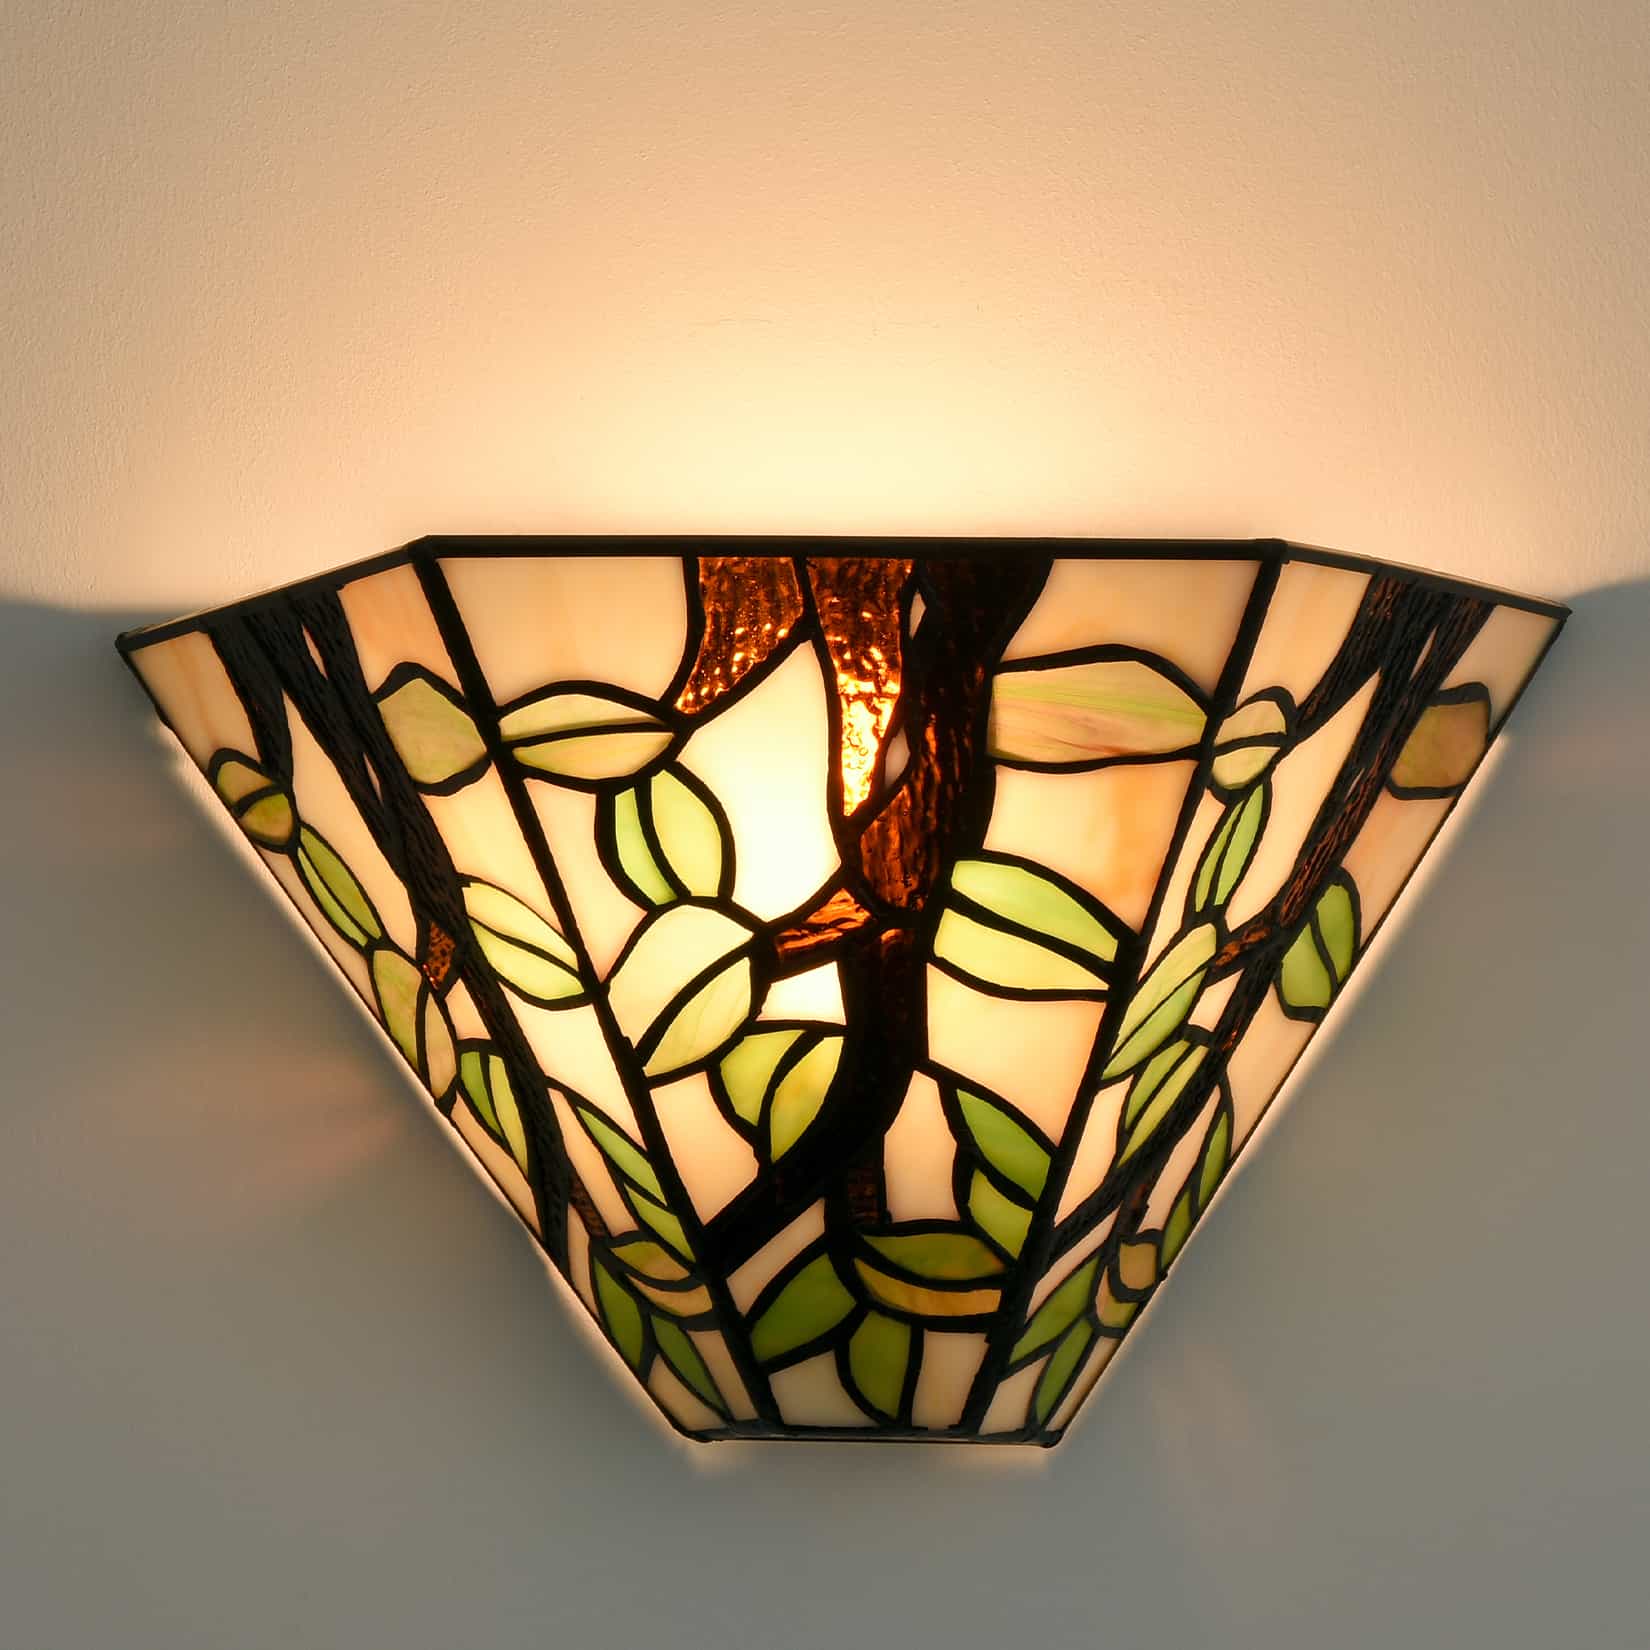 Tiffany Wall Sconces Vintage Stained Glass Wall Light